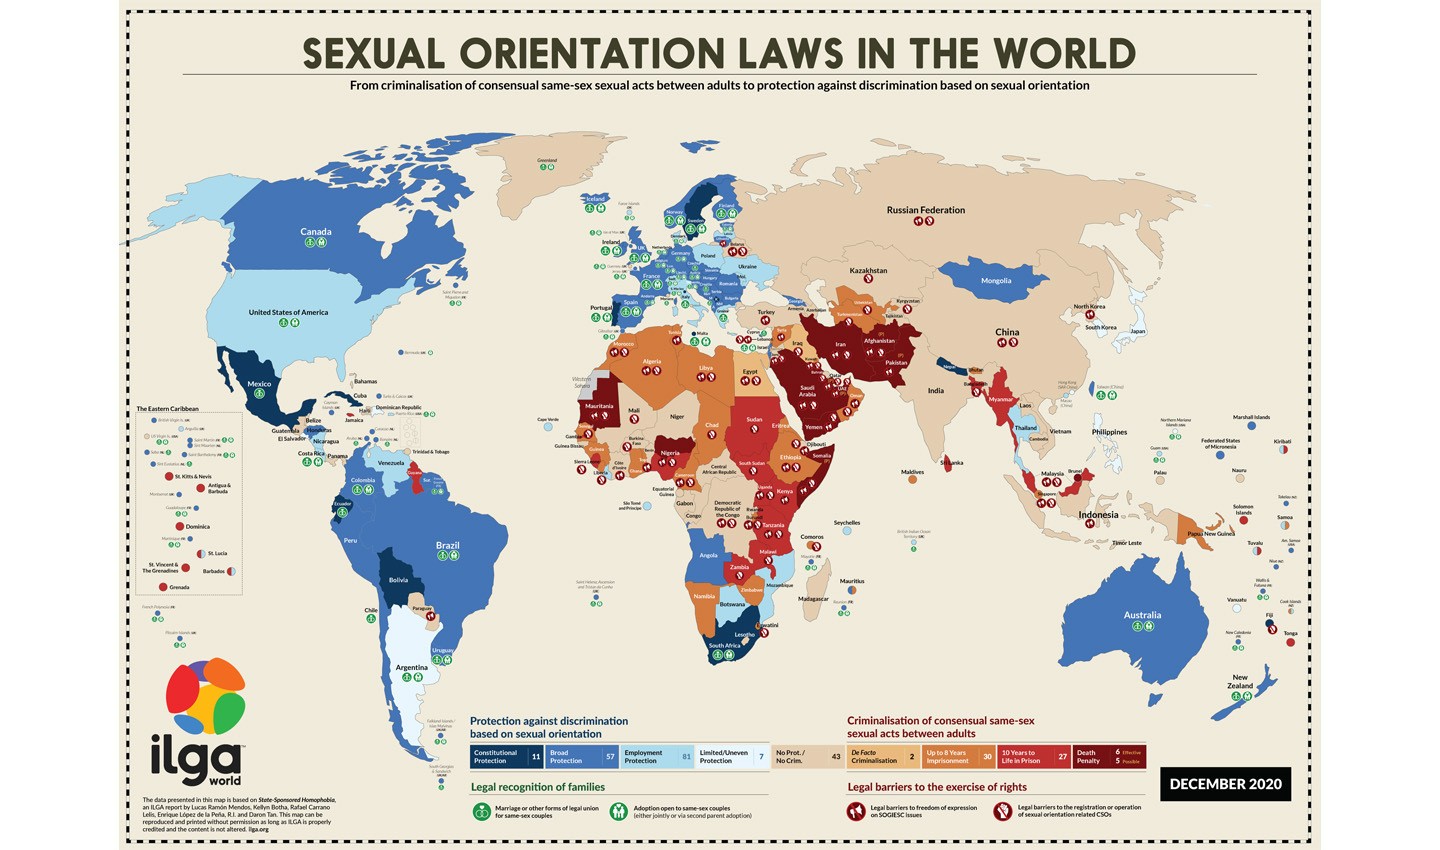 The 2020 ILGA World map of sexual orientation laws in the world